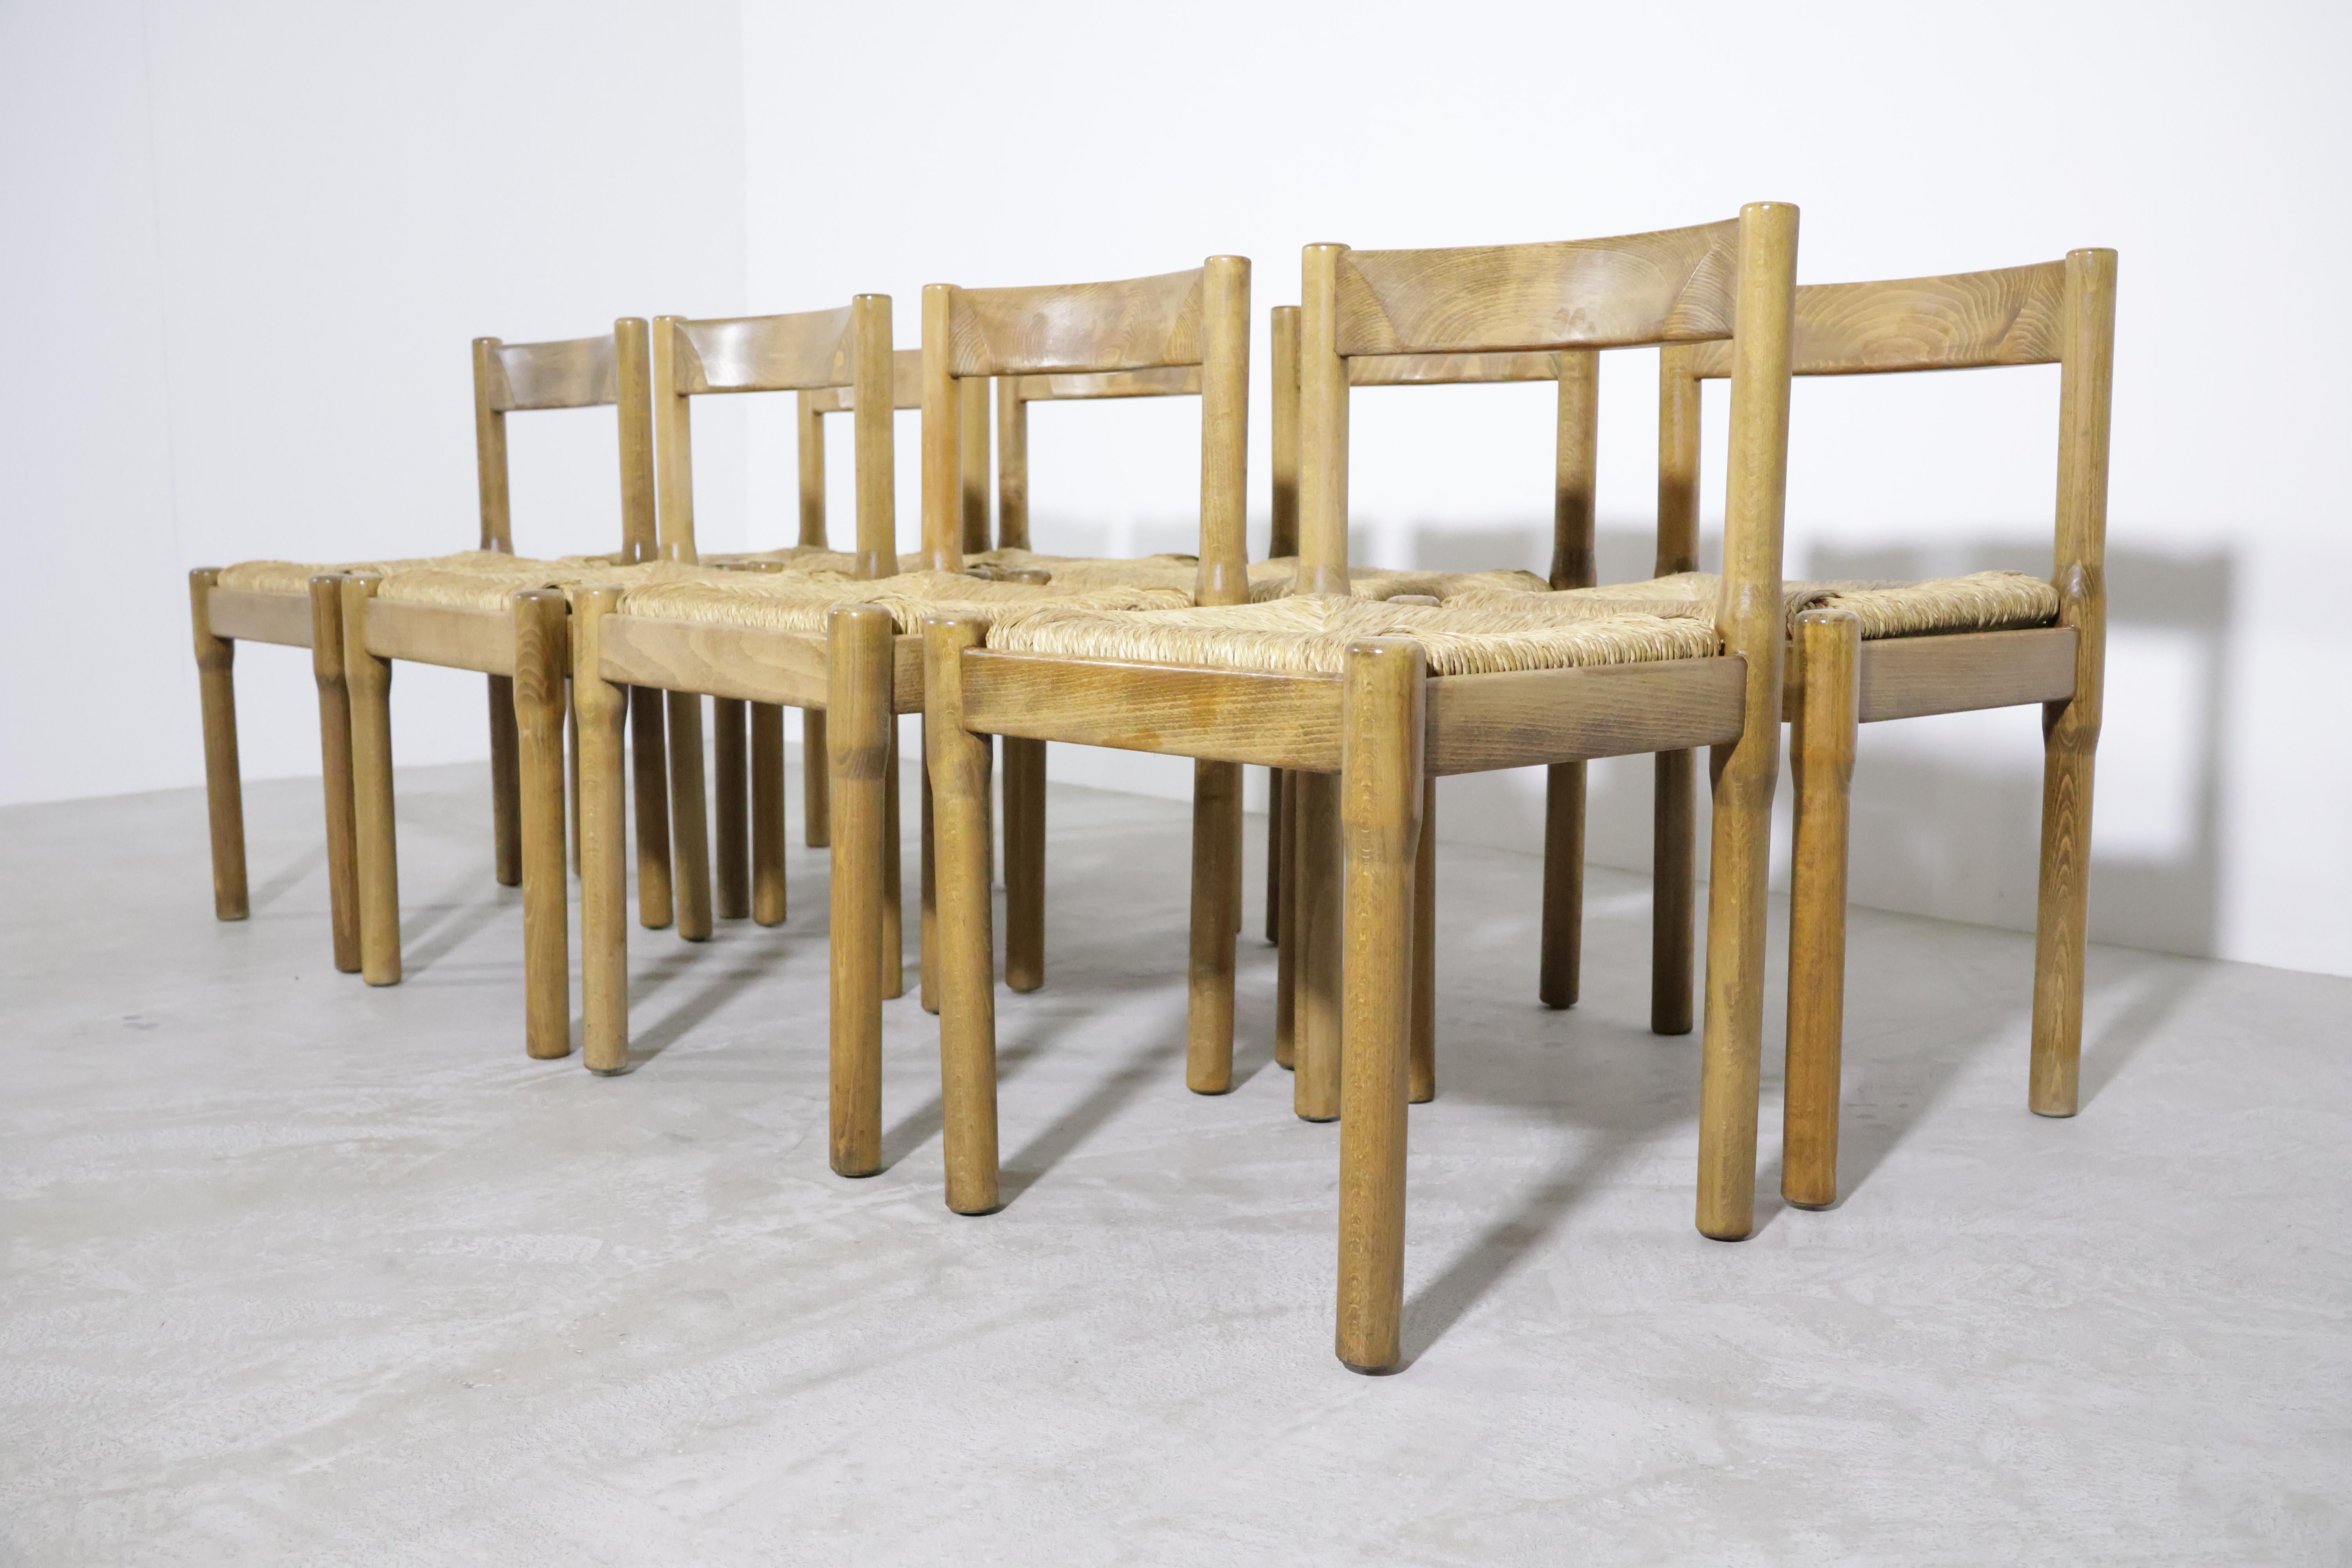 A beautiful set of eight 'Carimate' dining chairs by Vico Magistretti for Mario Luigi Comi/Italy in the 60s!
The 'Carimate' chair is one of Vico Magistretti's most famous chair and for him, rather unsual, as his furniture is better known for the